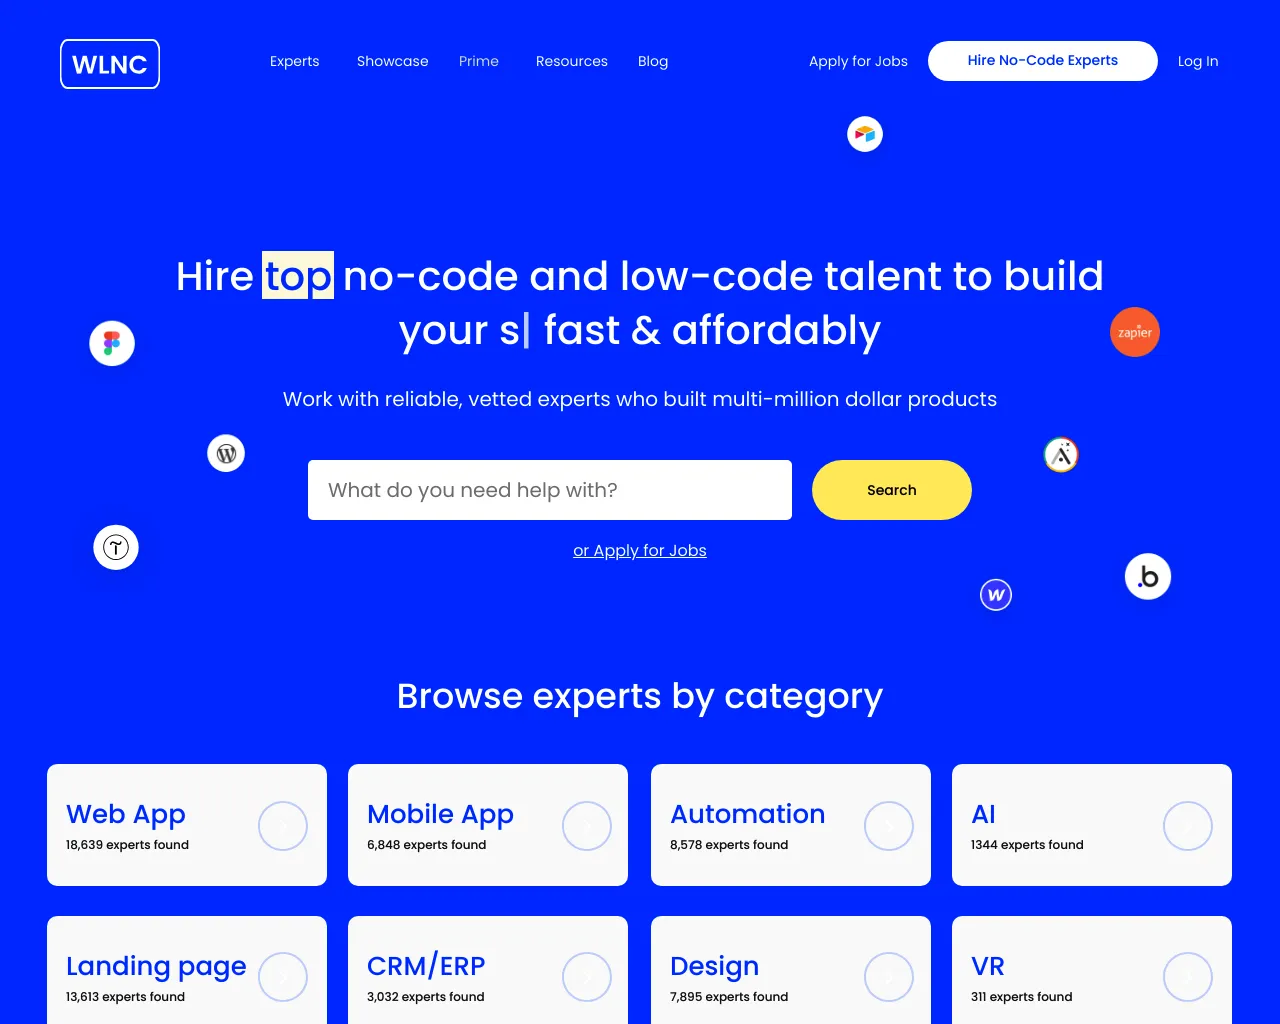 Hire Top No-Code and Low-Code Talent to Build Your Website Fast & Affordably